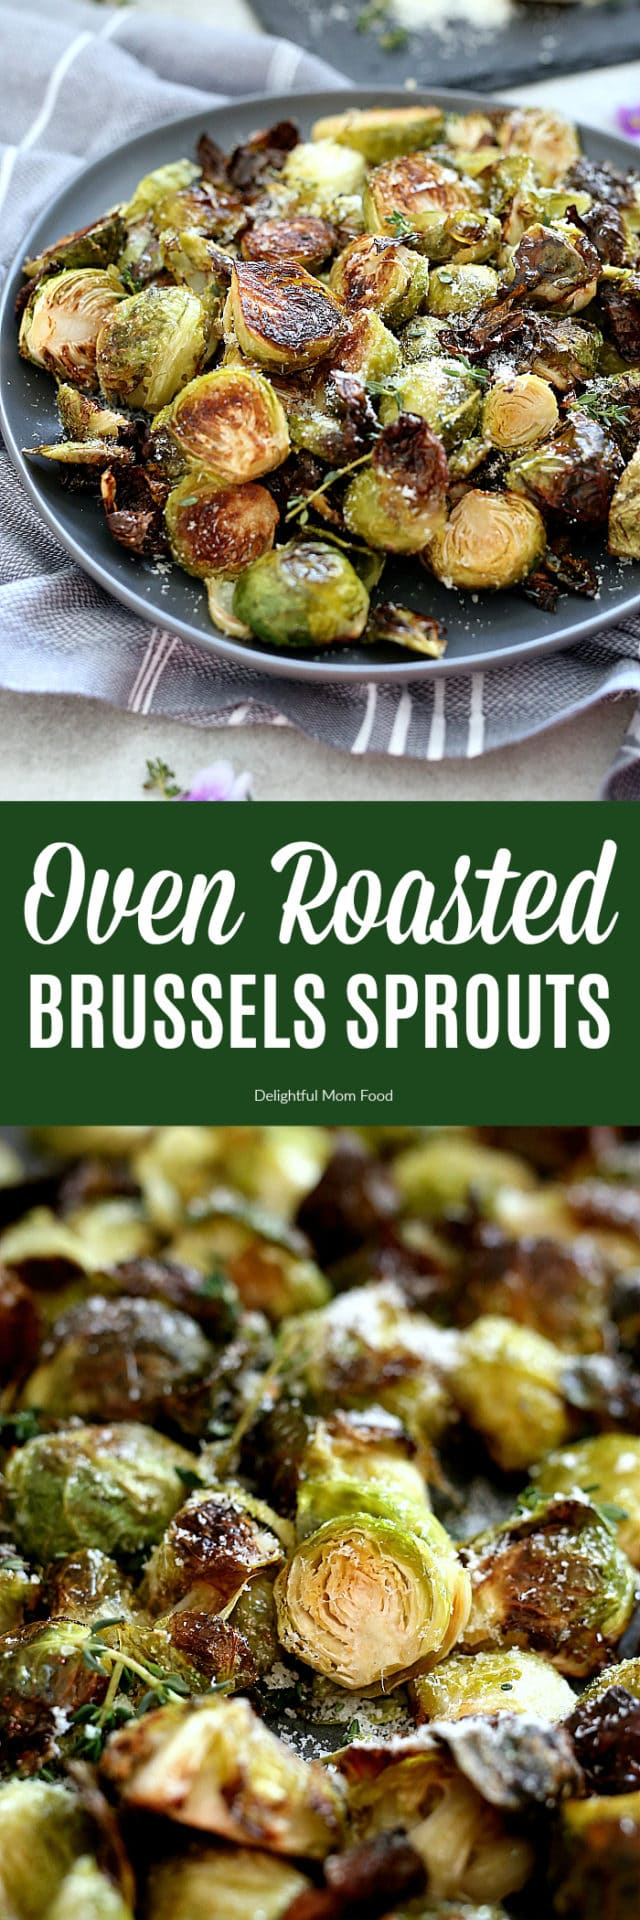 Oven Roasted Brussels Sprouts - Delightful Mom Food